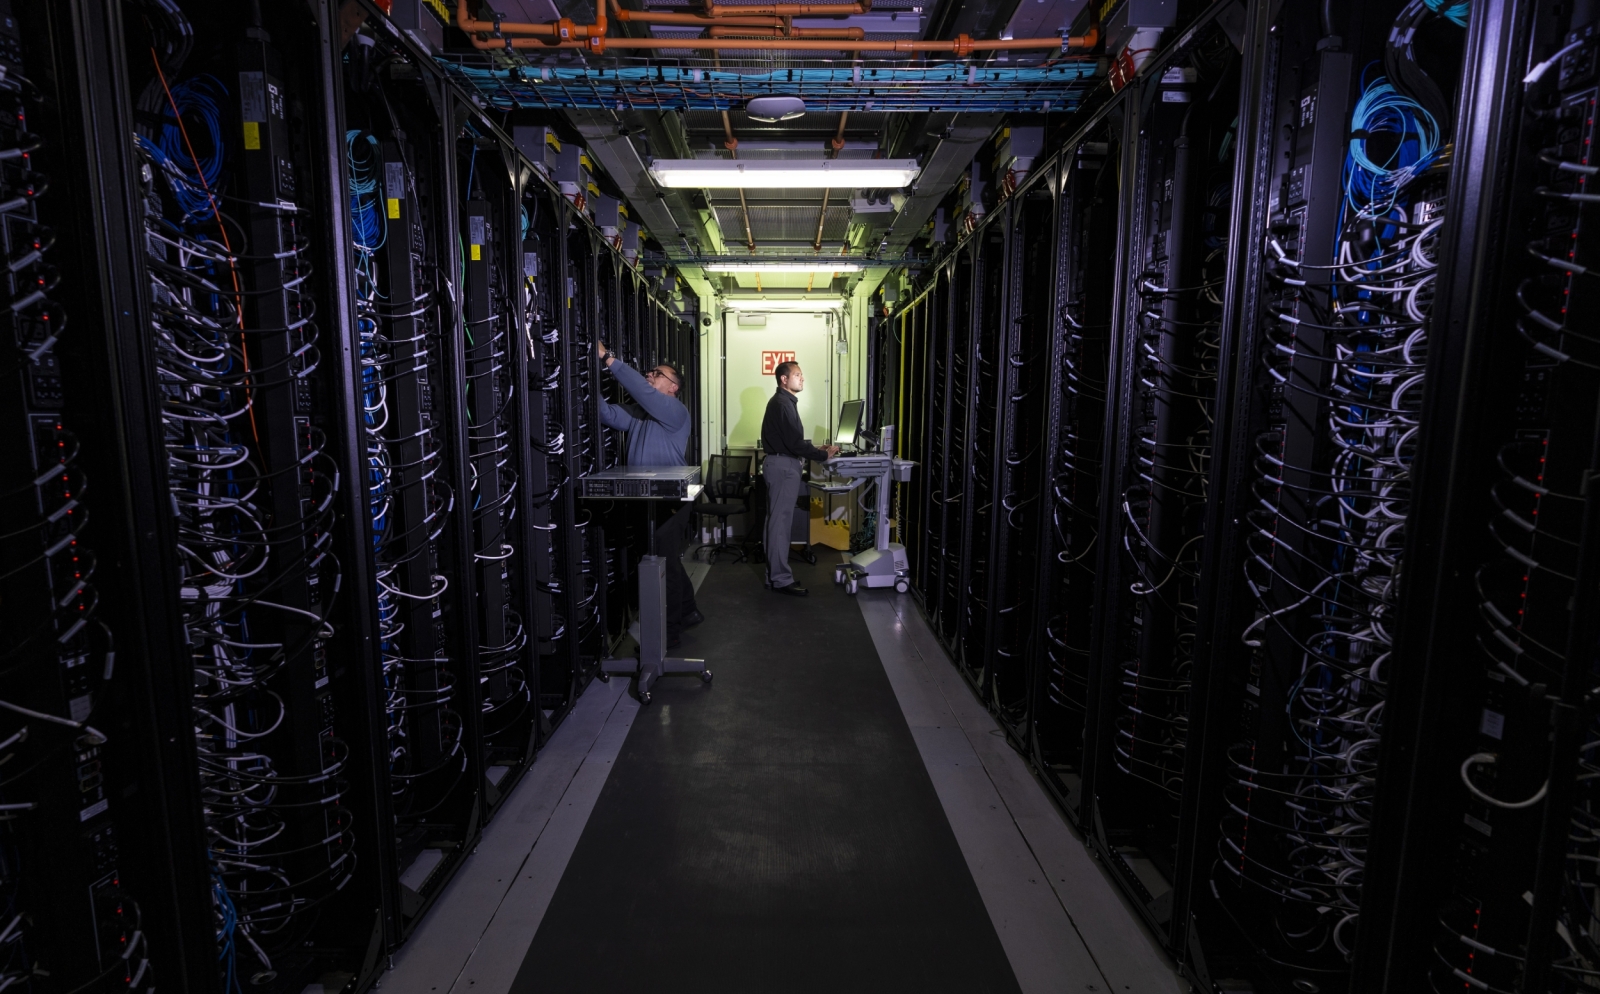 A photo of a hallway between two rows of data center servers. Two researchers are working on the servers.